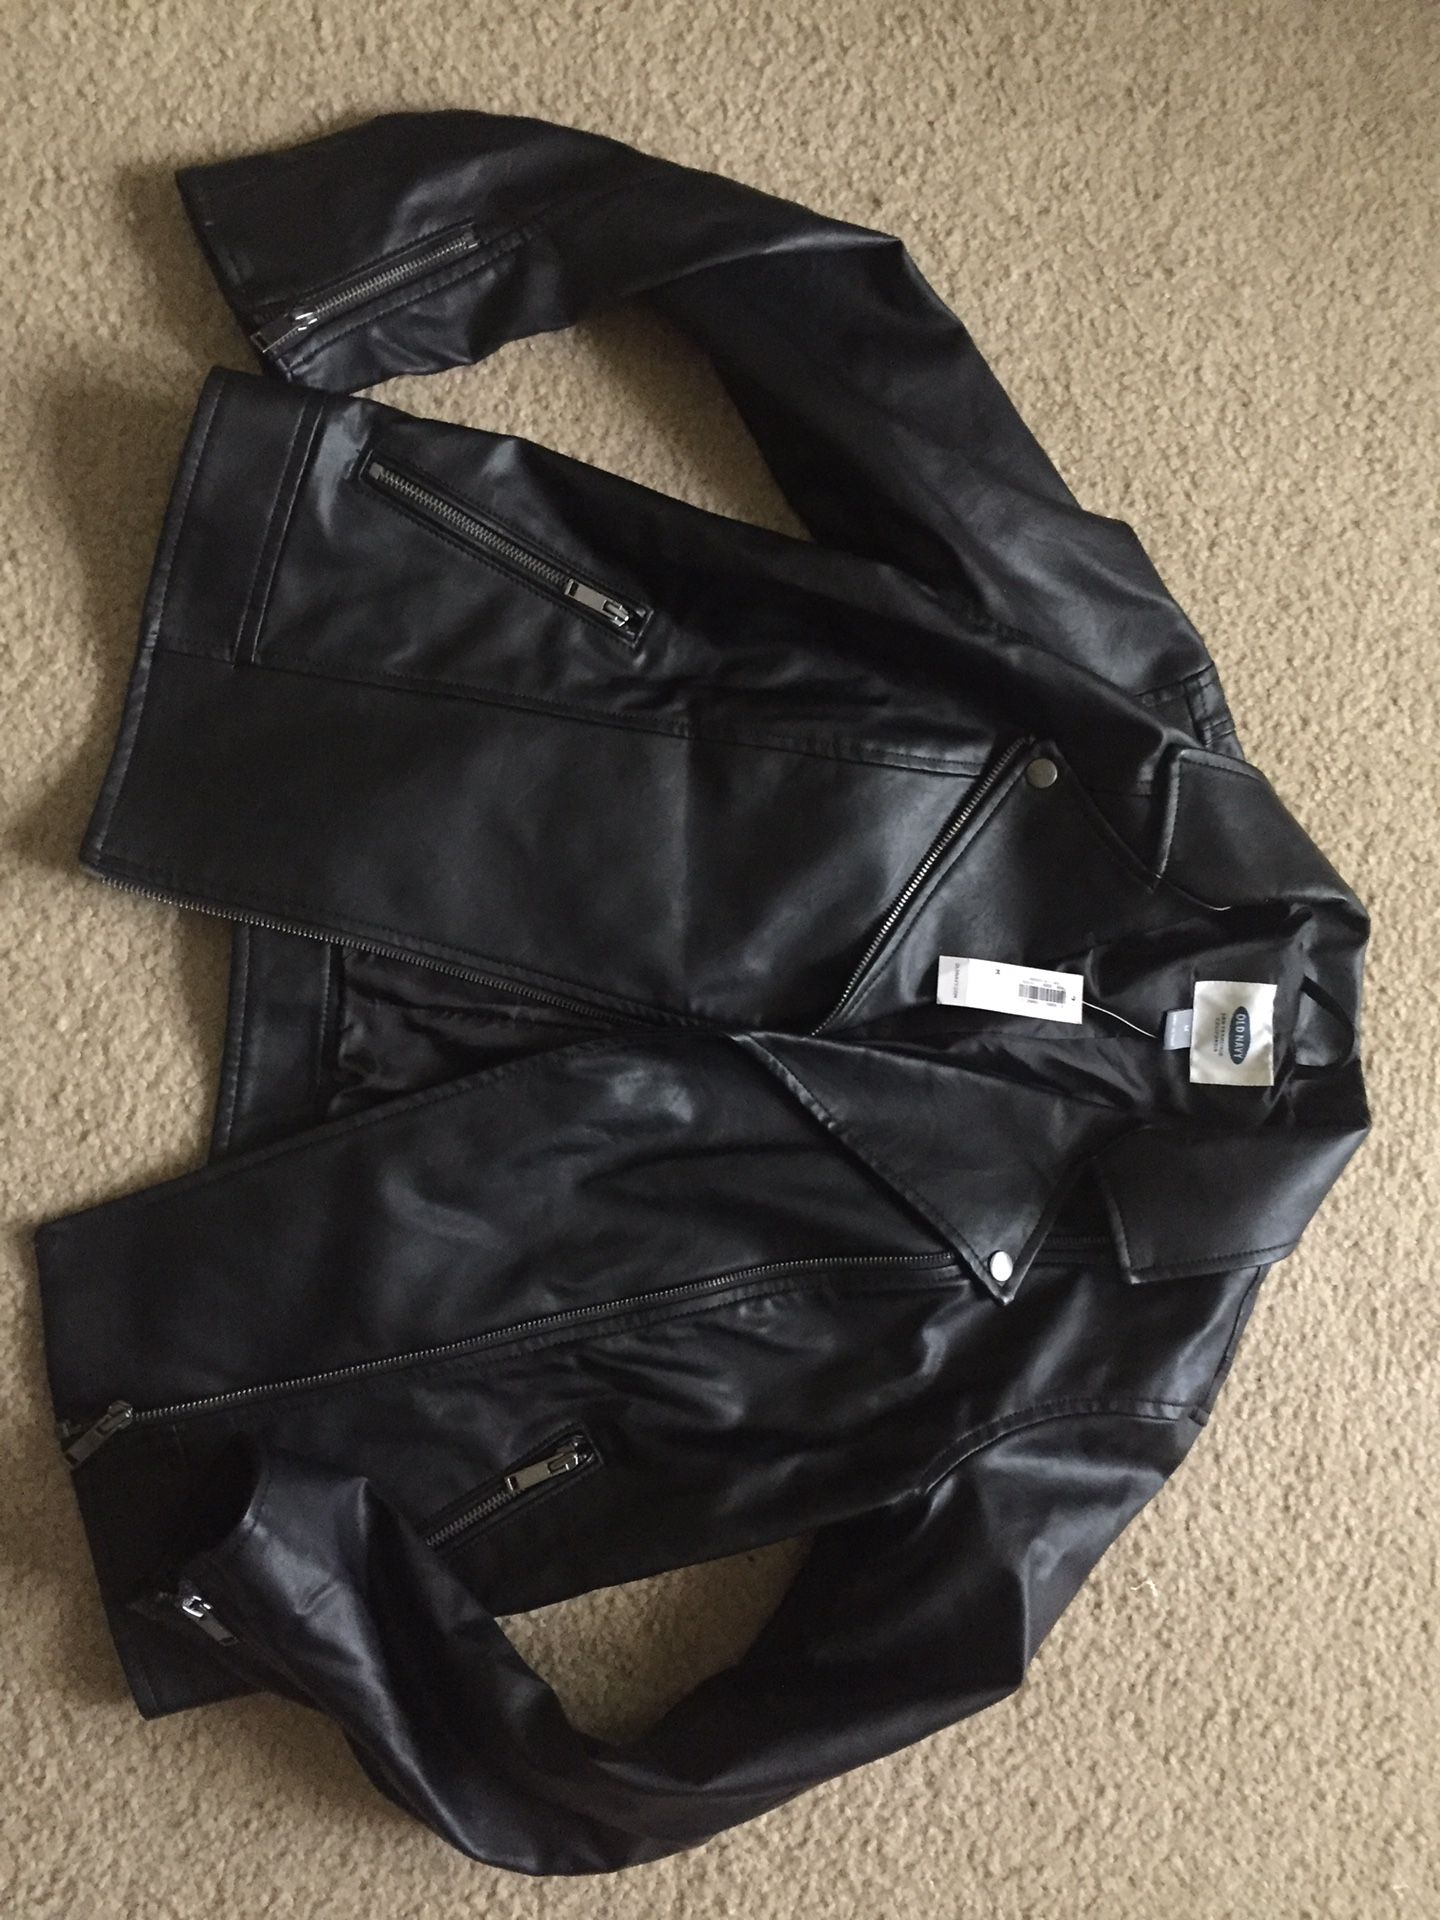 Old navy faux leather jacket